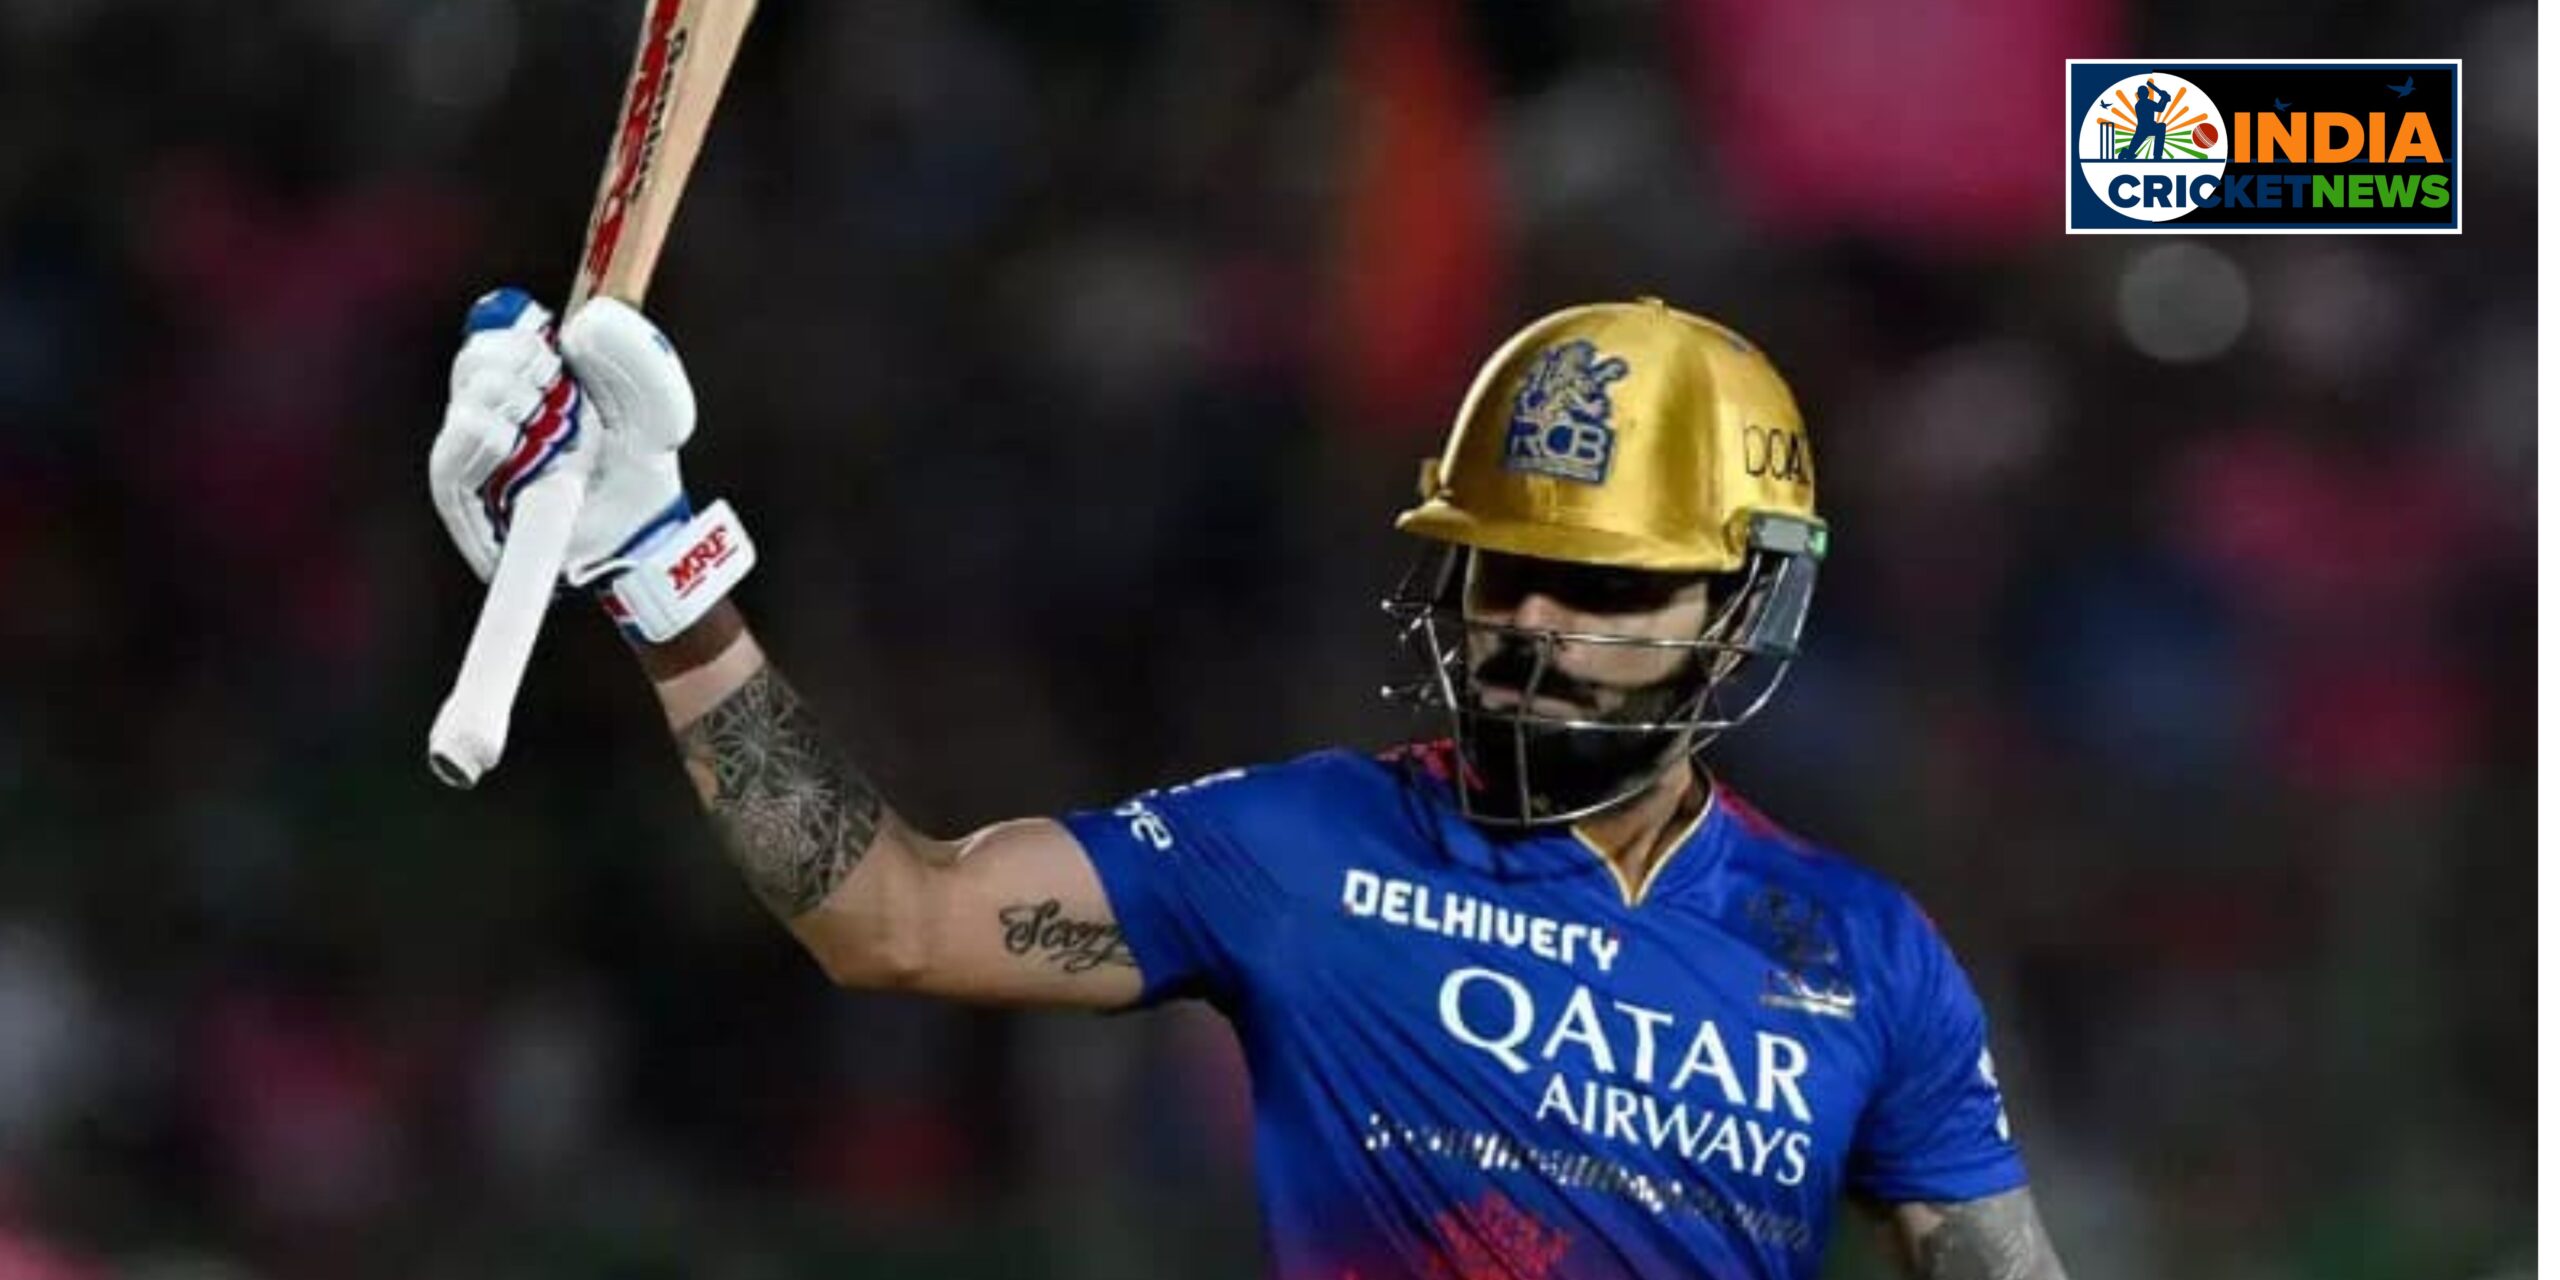 Virat Kohli Slams 'Slowest' IPL Ton Ever, Then Says, "Couldn't Get Over..."Virat Kohli's century vs RR came in 67 balls, which is the joint-slowest IPL ton ever.